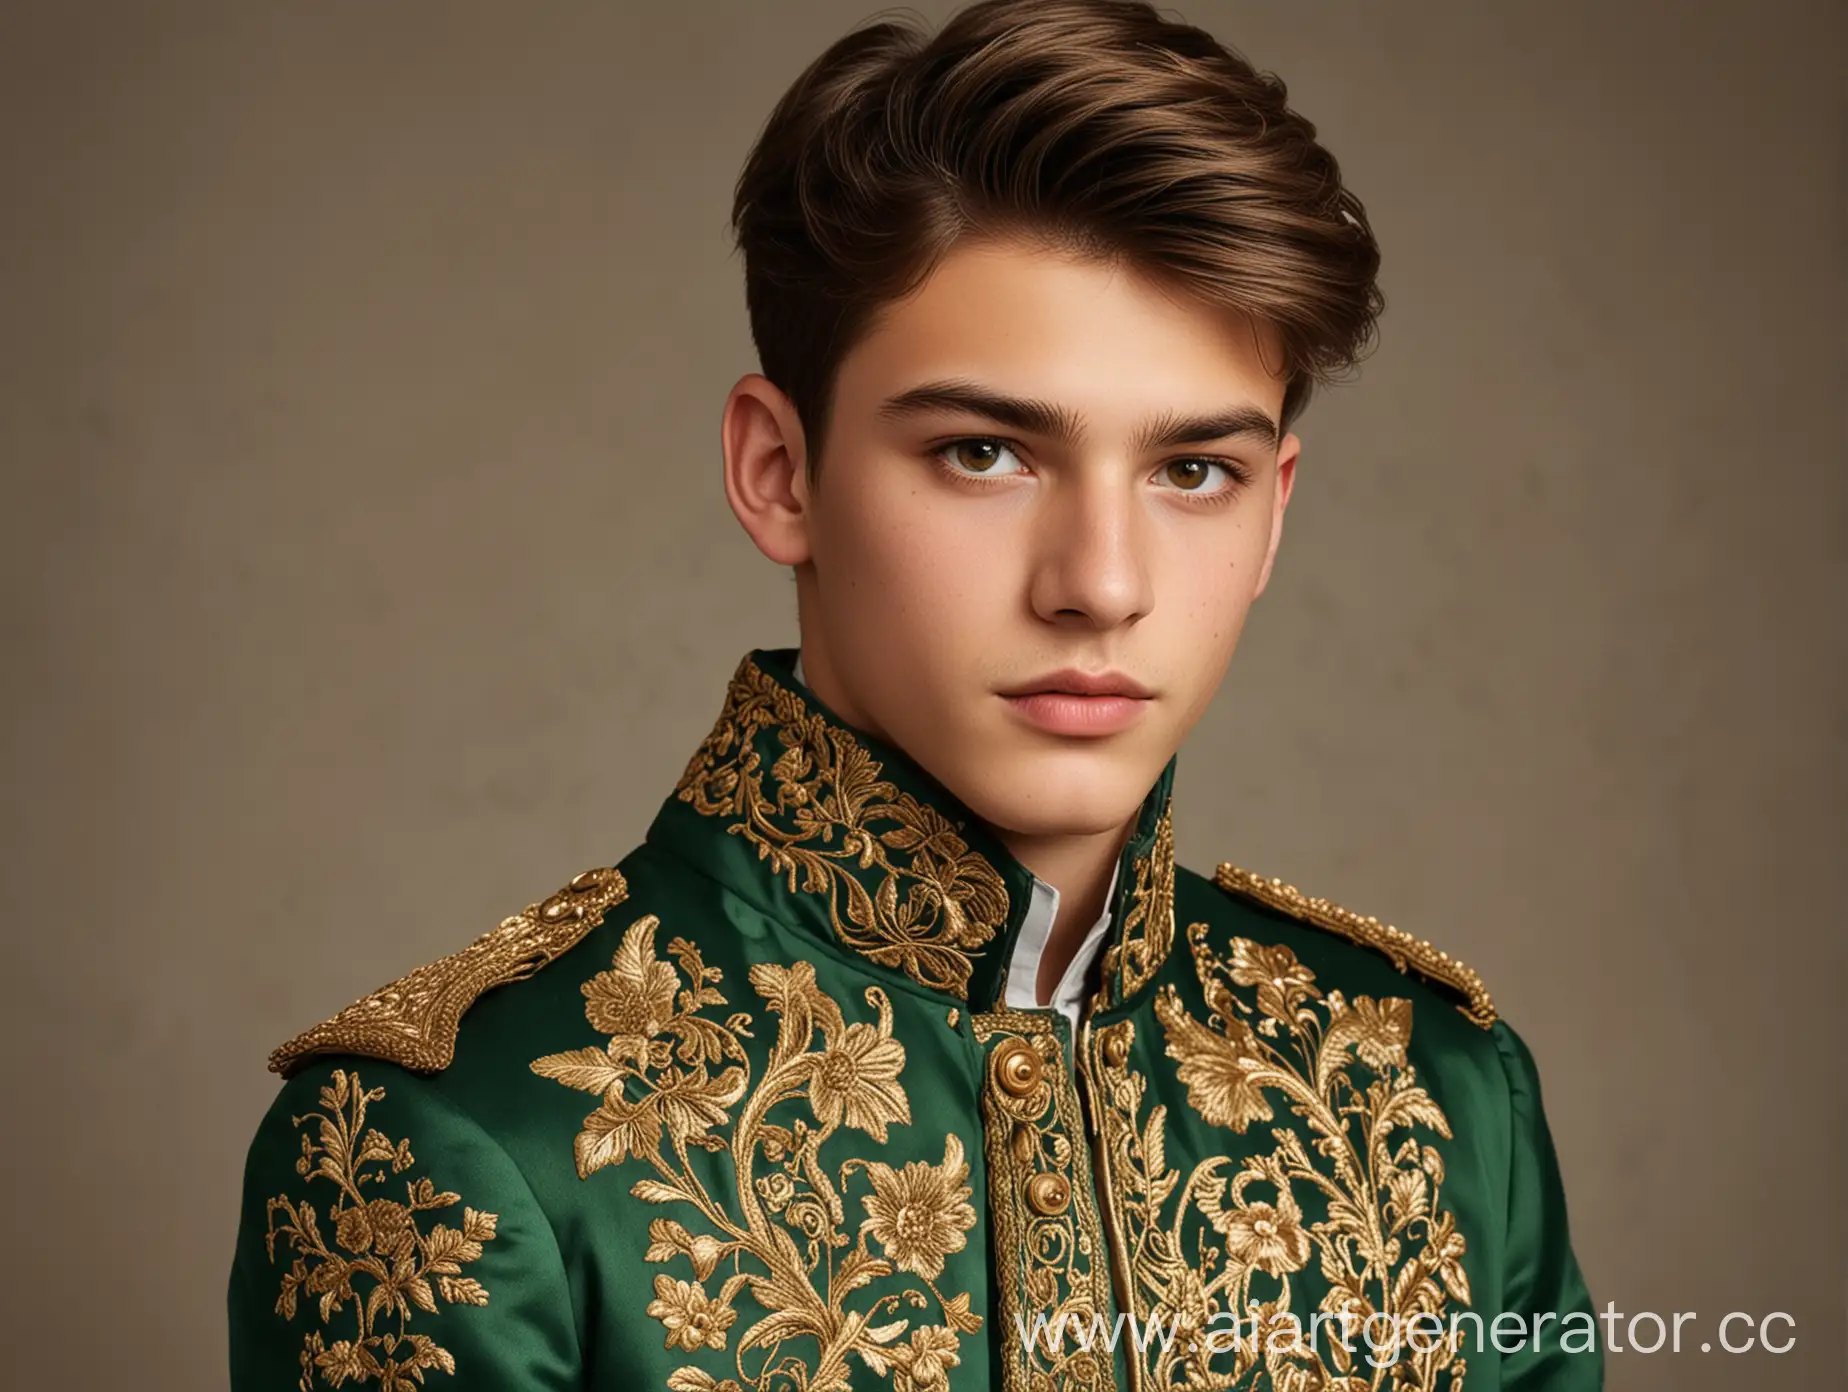 Young-Man-in-Elegant-Green-Coat-with-Gold-Embroidery